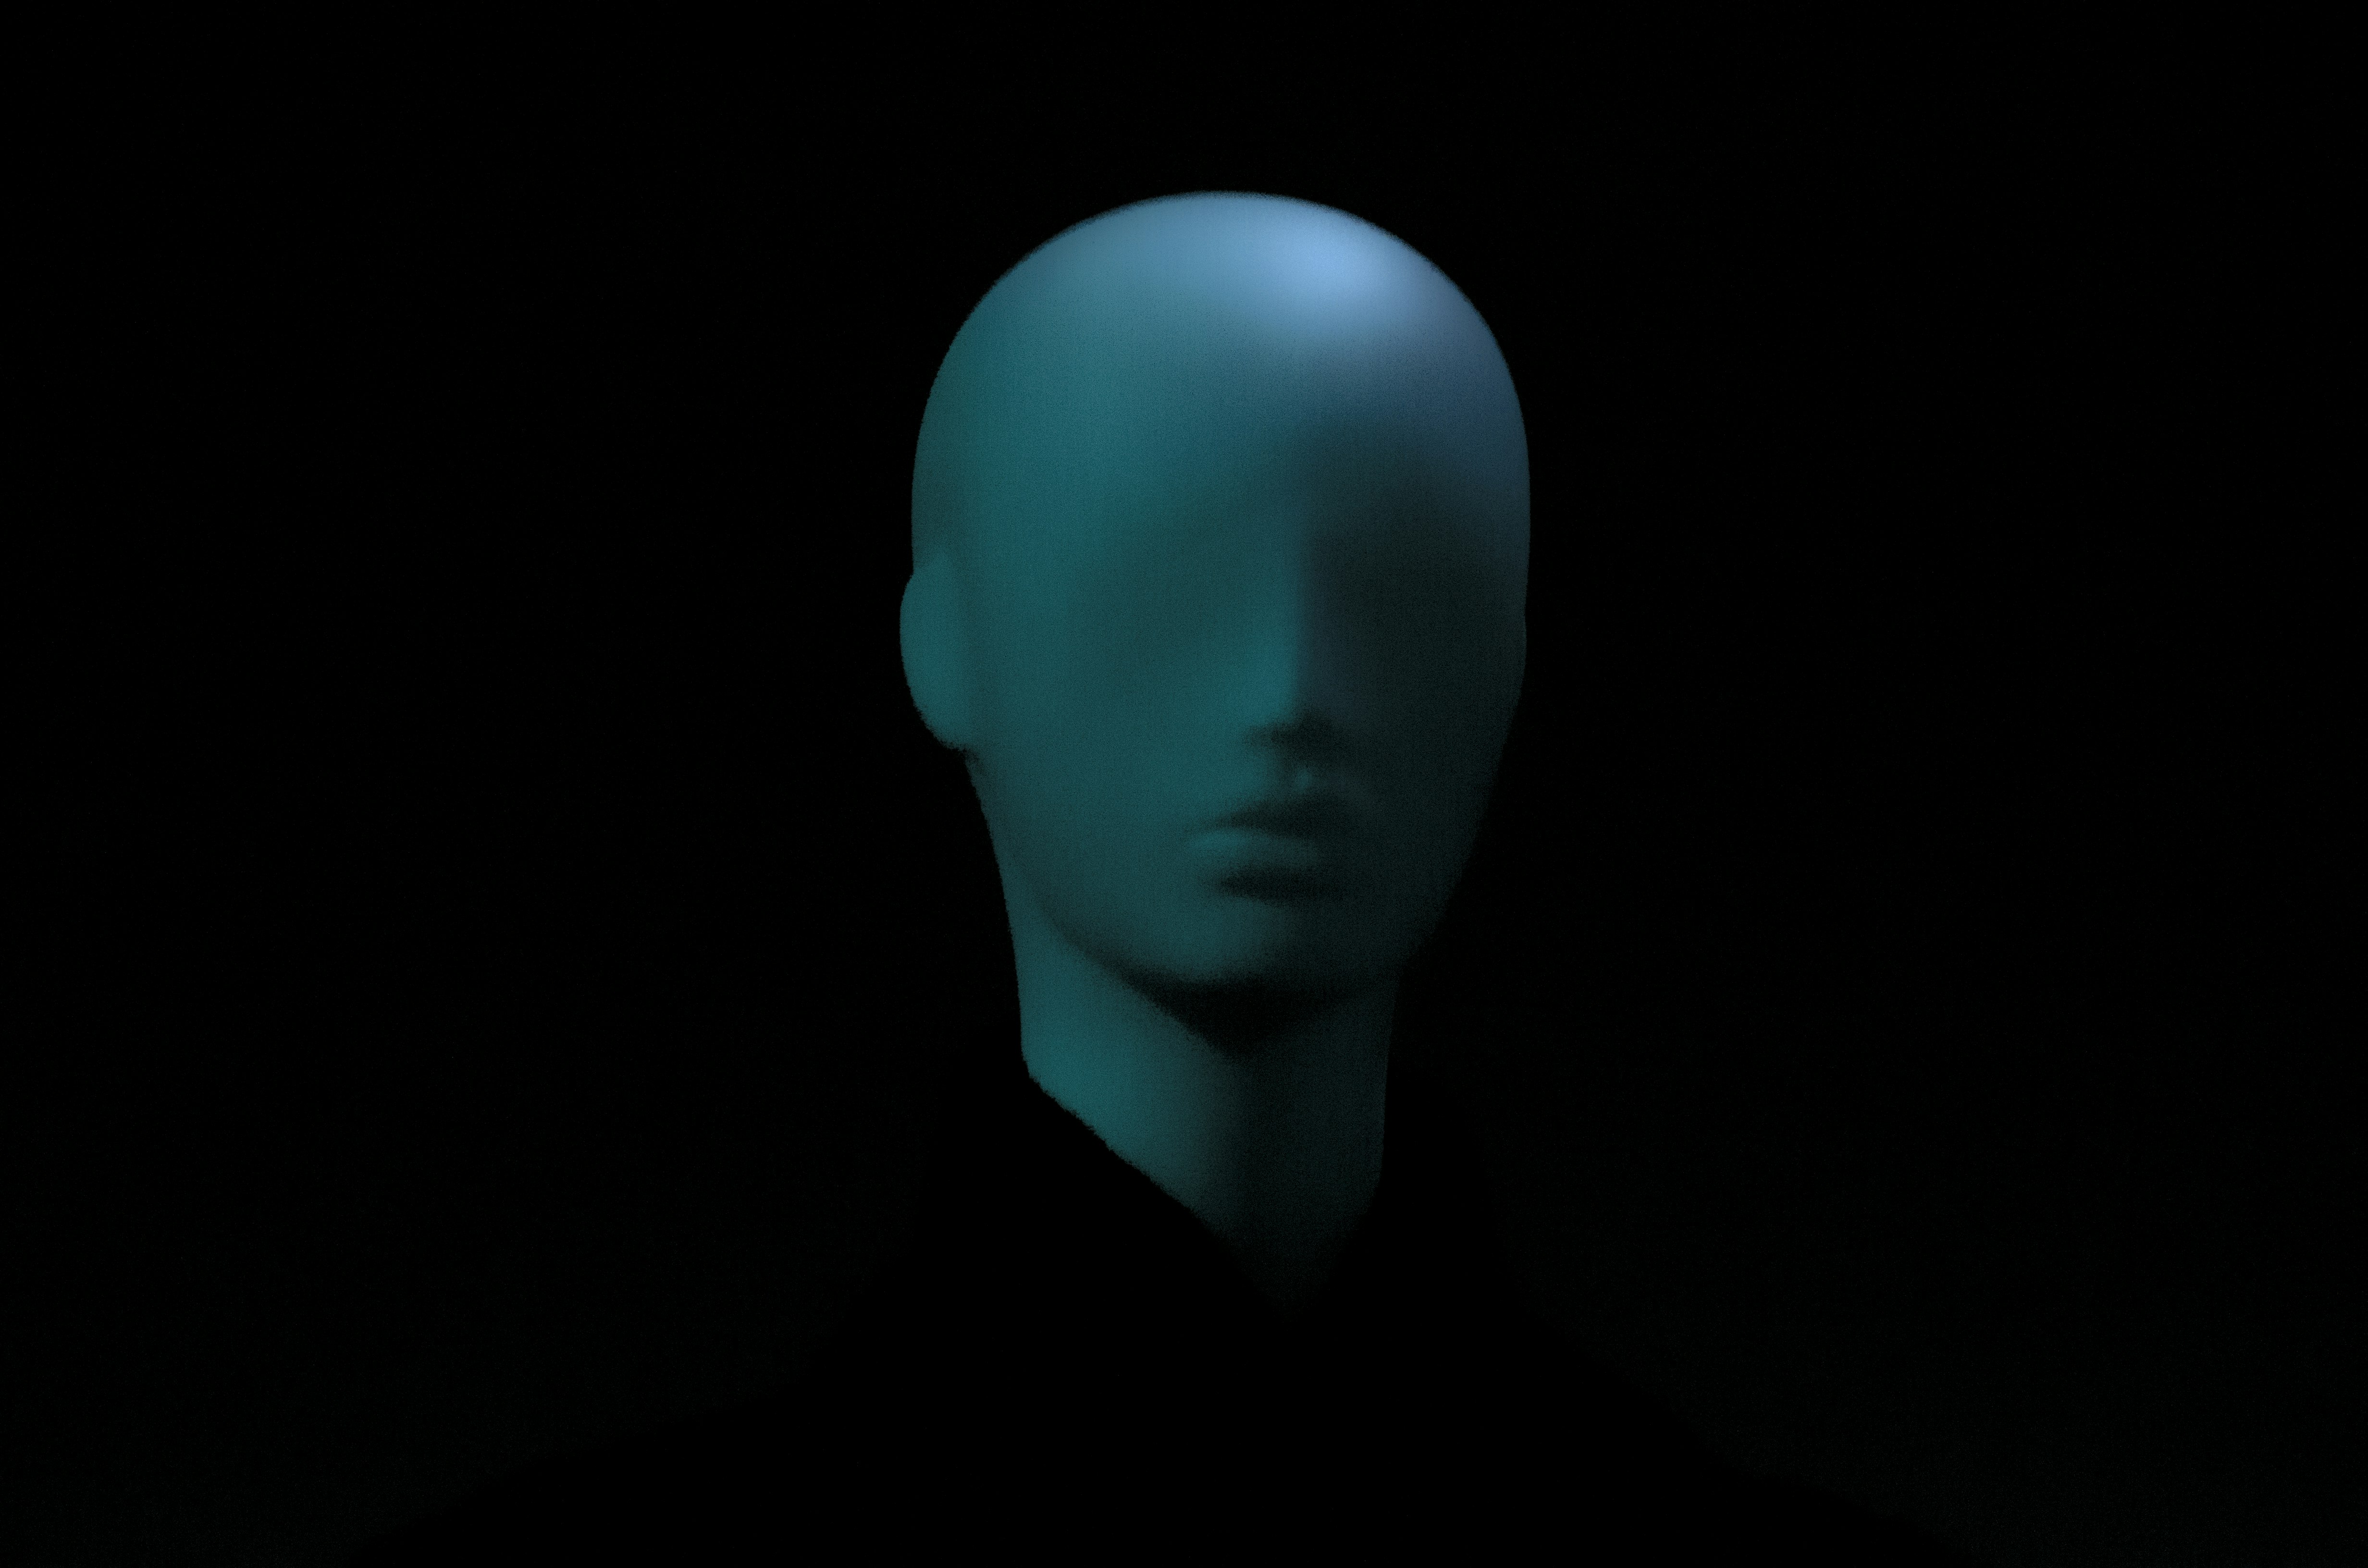 Blue model, mannequin’s head, face with no eyes

